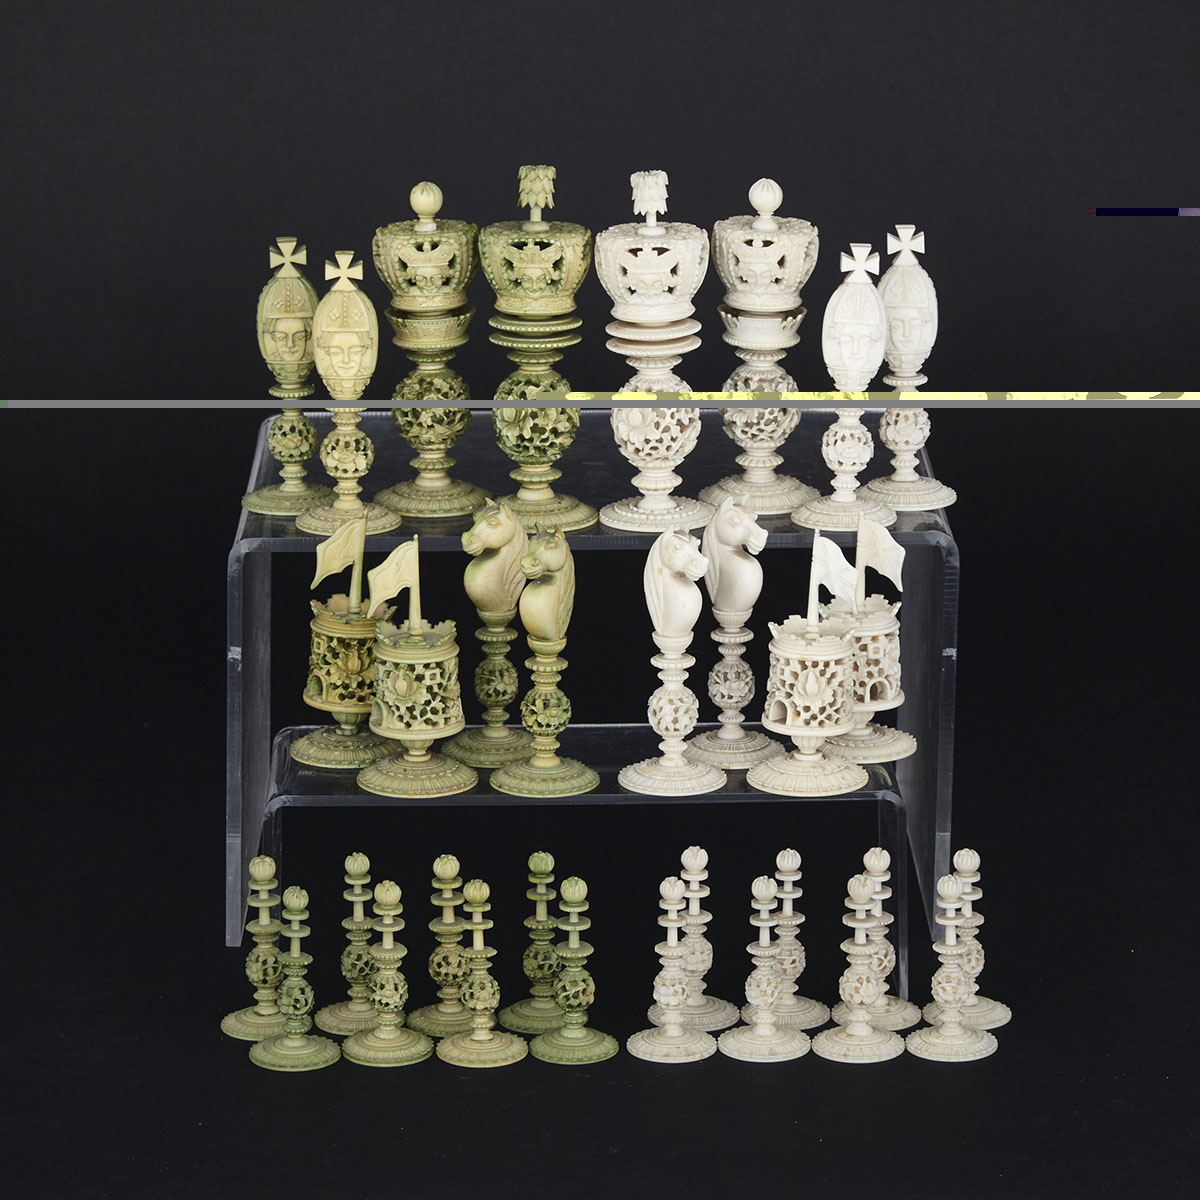 Large Chinese Export Turned and Carved Ivory ‘Burmese Pattern’ Chess Set, 19th century